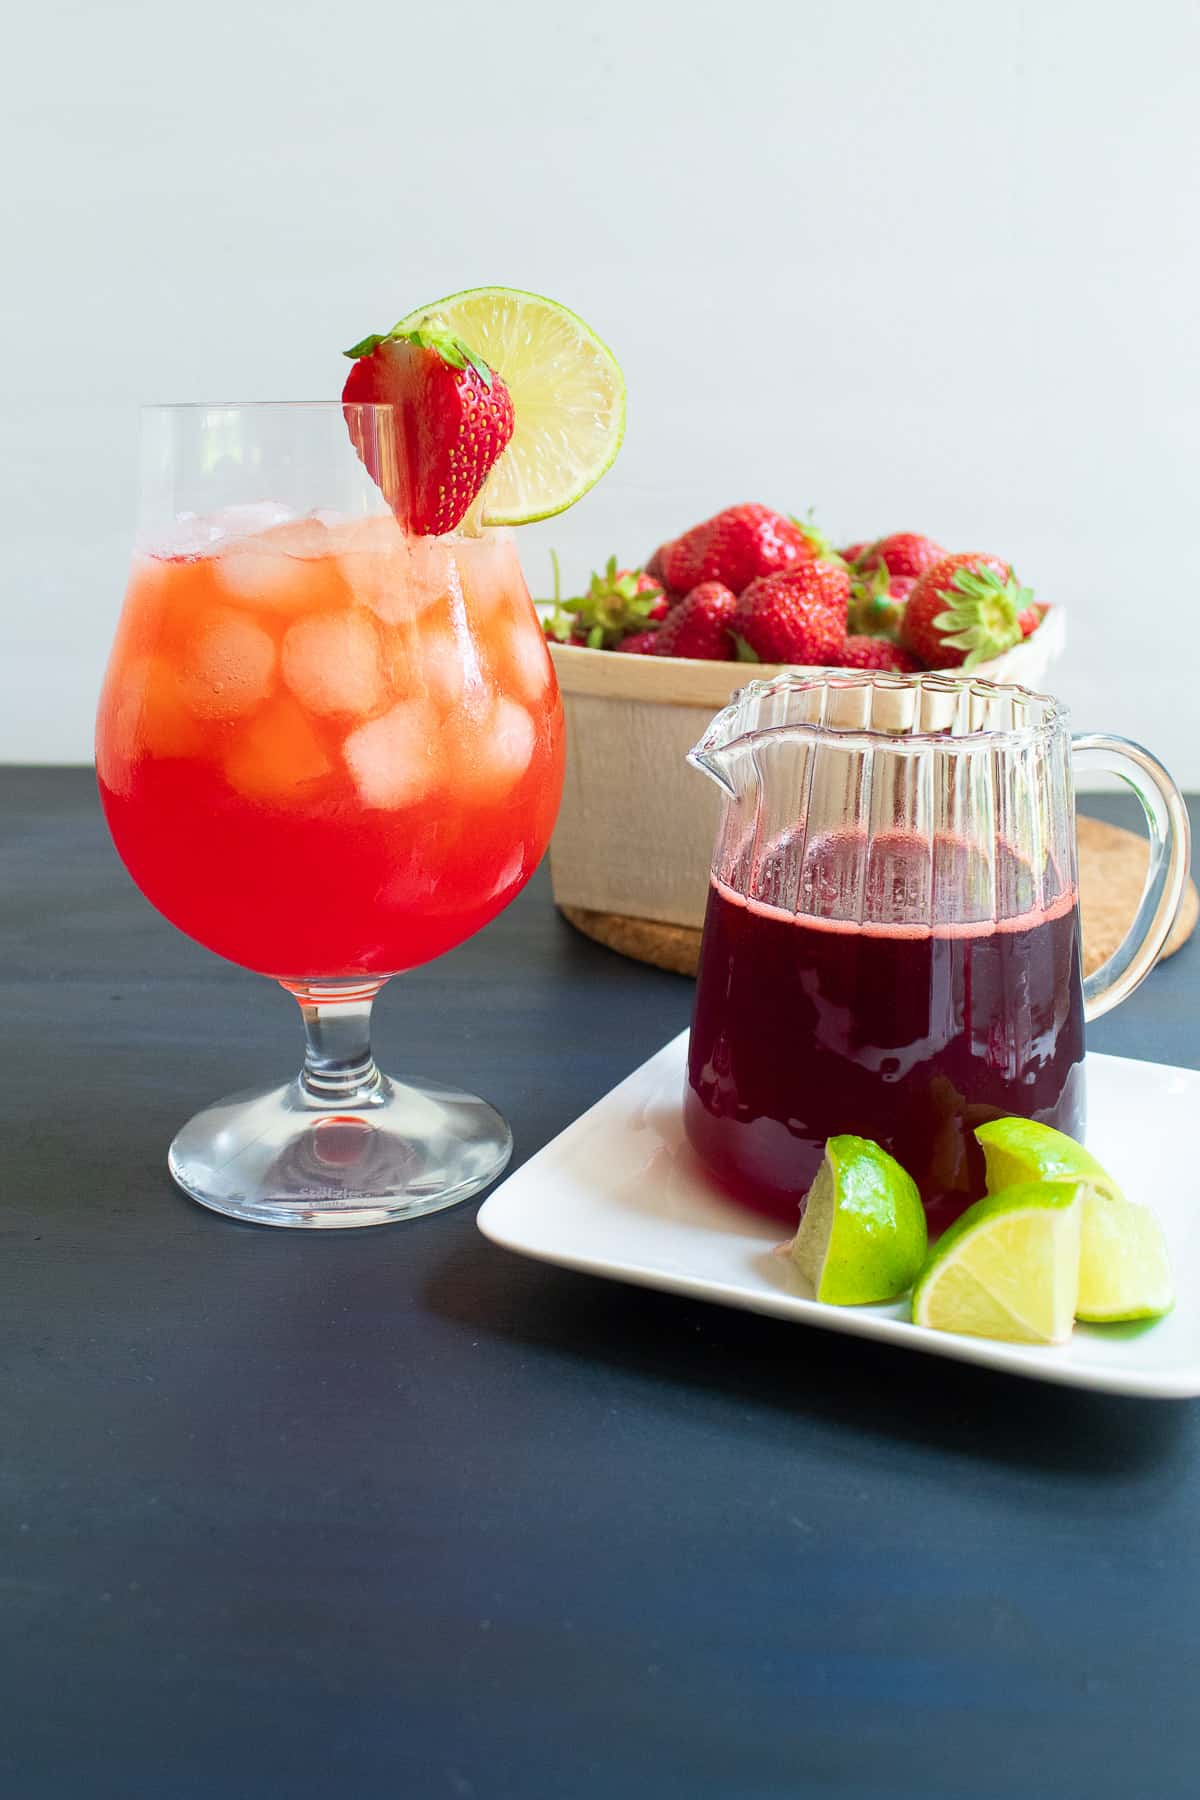 A large glass of strawberry limeade is garnished with a fresh strawberry and a lime wheel sits next to a pitcher of strawberry syrup and lime wedges.